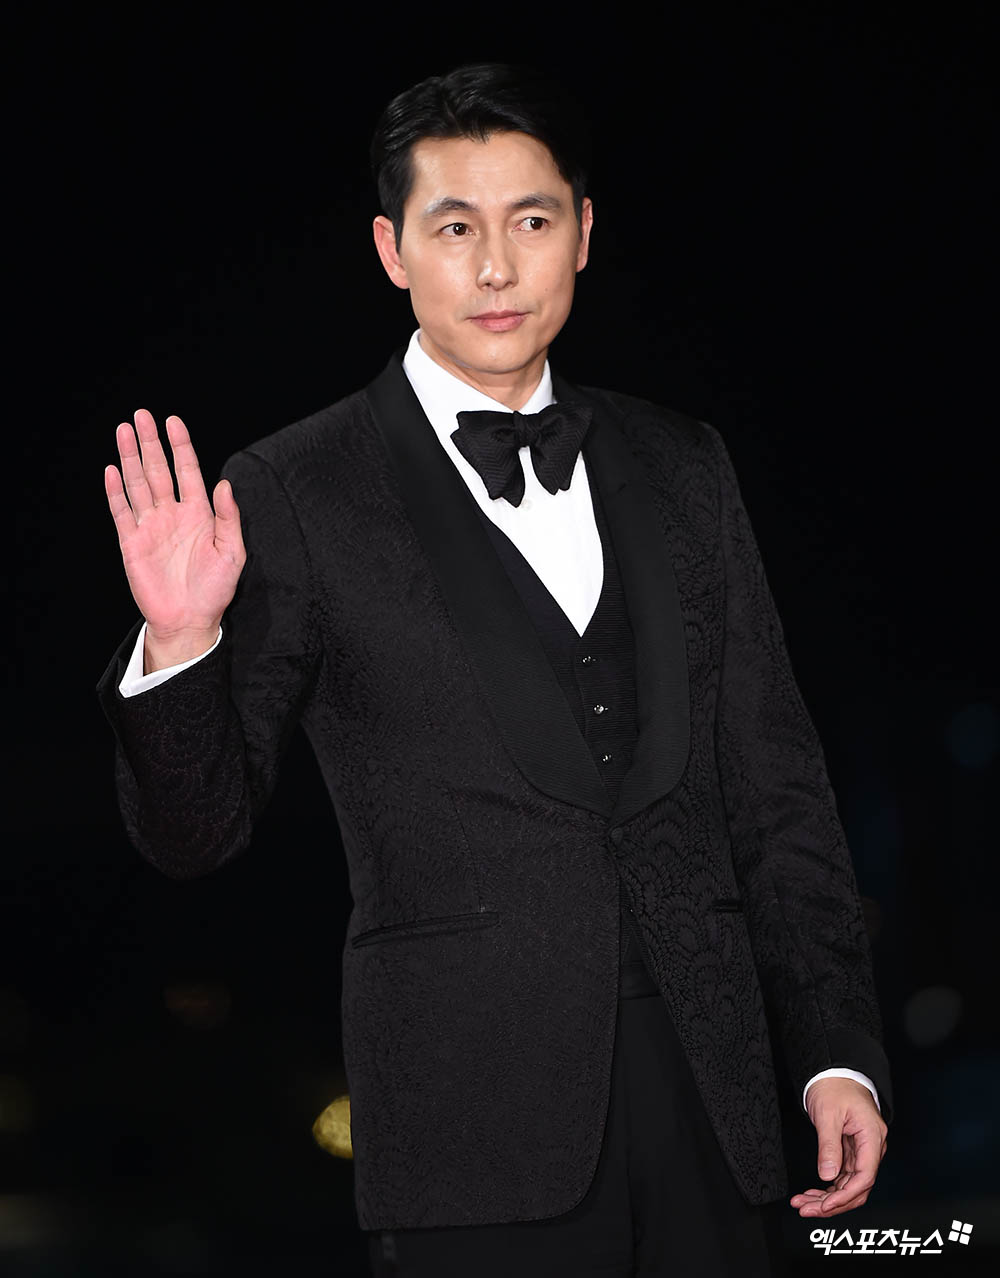 Netflix announced today that actor Jung Woo-sung, who won the 2019 Blue Dragon Film Award for Best Space, will participate as a producer in the new Netflix OLizynal series The Sea of Goyo.Netflix announced on the 23rd that We will produce the new Korea OLizynal series and Space SF thriller Goyos Sea.Goyos Sea is the story of elite members who go to the research base abandoned on the moon to retrieve a sample of questions in the background of the future earth where water and food are scarce due to global desertification.Goyos Sea is a series of short films of the same name directed by Choi Hang-yong, who received great attention at the 13th Missen Short Film Festival in 2014, and is a fascinating work with a tense and unpredictable story based on a vast space.Actor Jung Woo-sung participates as a producer in Goyos Sea, which will be reborn as a Netflix OLizzyn series.Jung Woo-sung, who has been raising the best share price as an actor with the award of the Blue Dragon Film Award for Best Space, has also produced and starred in the feature film Do not forget me in 2016.As an actor, he is in the top position and hopes for another transformation to show with Netflix as a producer.The screenplay of Goyos Sea is directed by Park Eun-kyo, who won the 29th Korea Film Critics Association Award for the movie Mother, and directed by Choi Han-yong, who directed the original.Goyos Sea has been evaluated by many fans after the release as a quality that exceeds the high level of story and expectation.This time, it is produced as Netflix OLizzynal series and it is expected to be further strengthened.Meanwhile, the Netflix OLizzynal series Goyos Sea, in which Jung Woo-sung will participate as a producer, will be released only on Netflix.Photo = DB